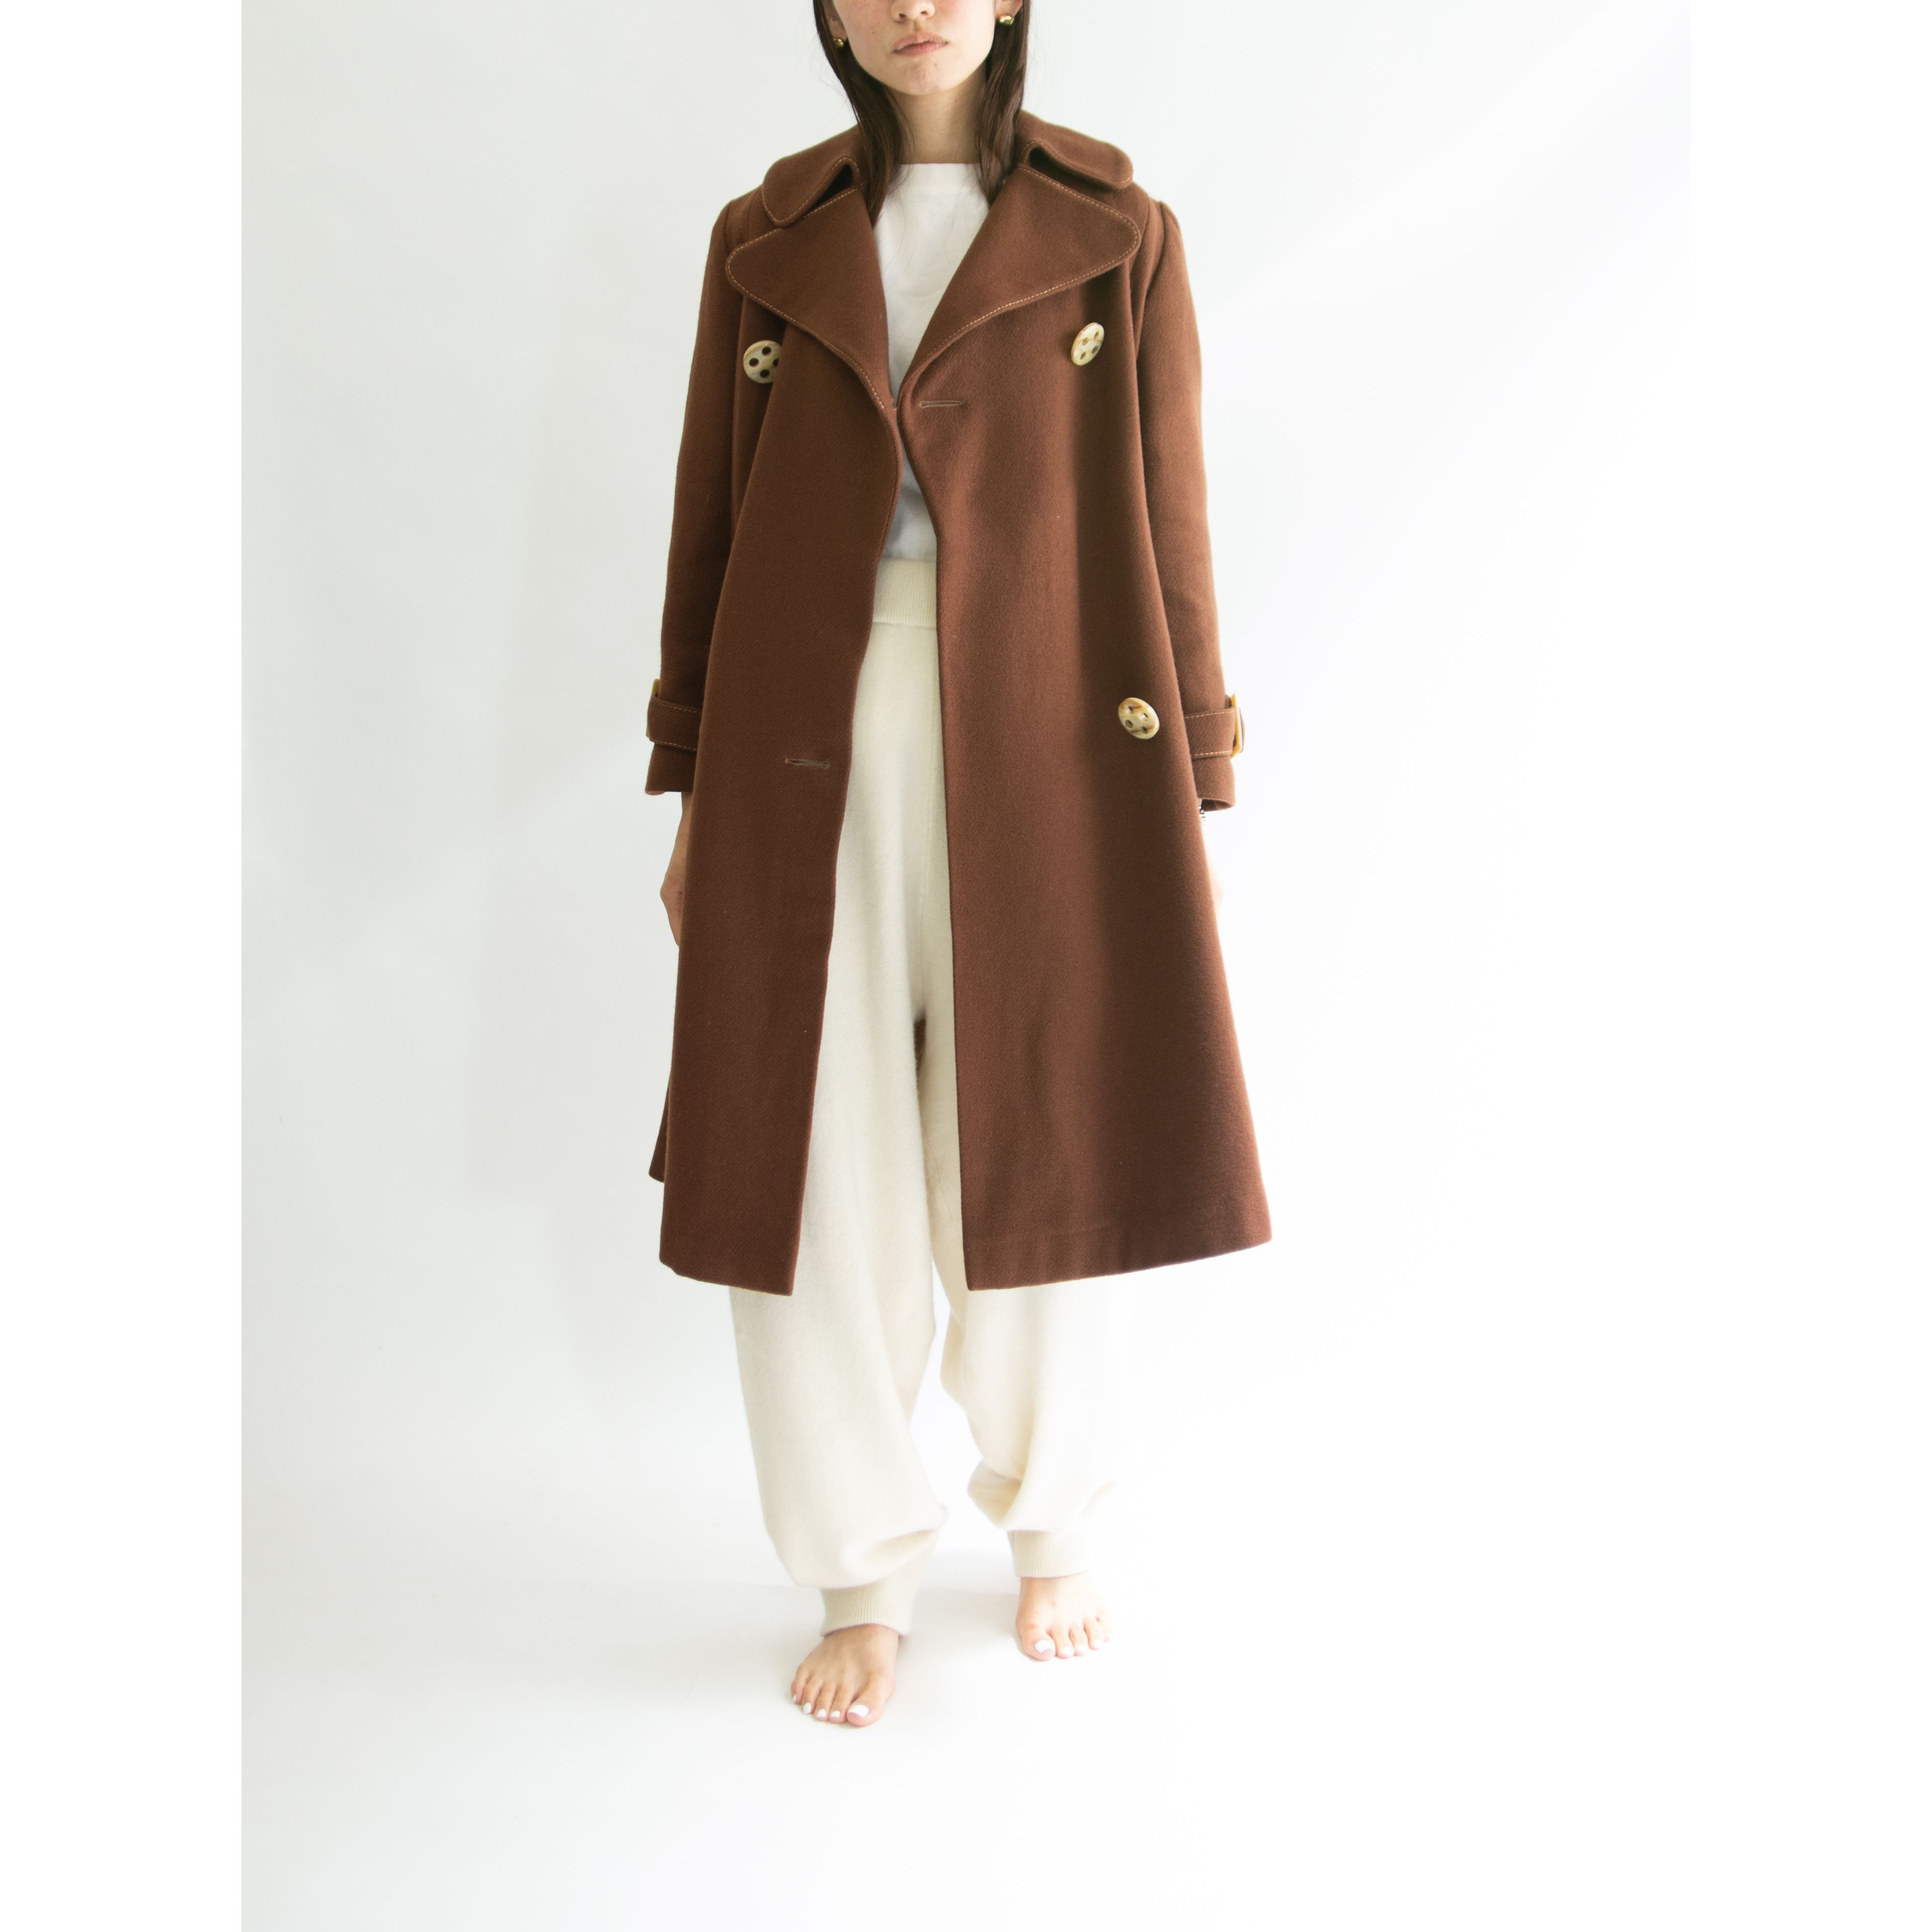 Emily Jane】Made in England belted wool coat（英国製 ベルテッド